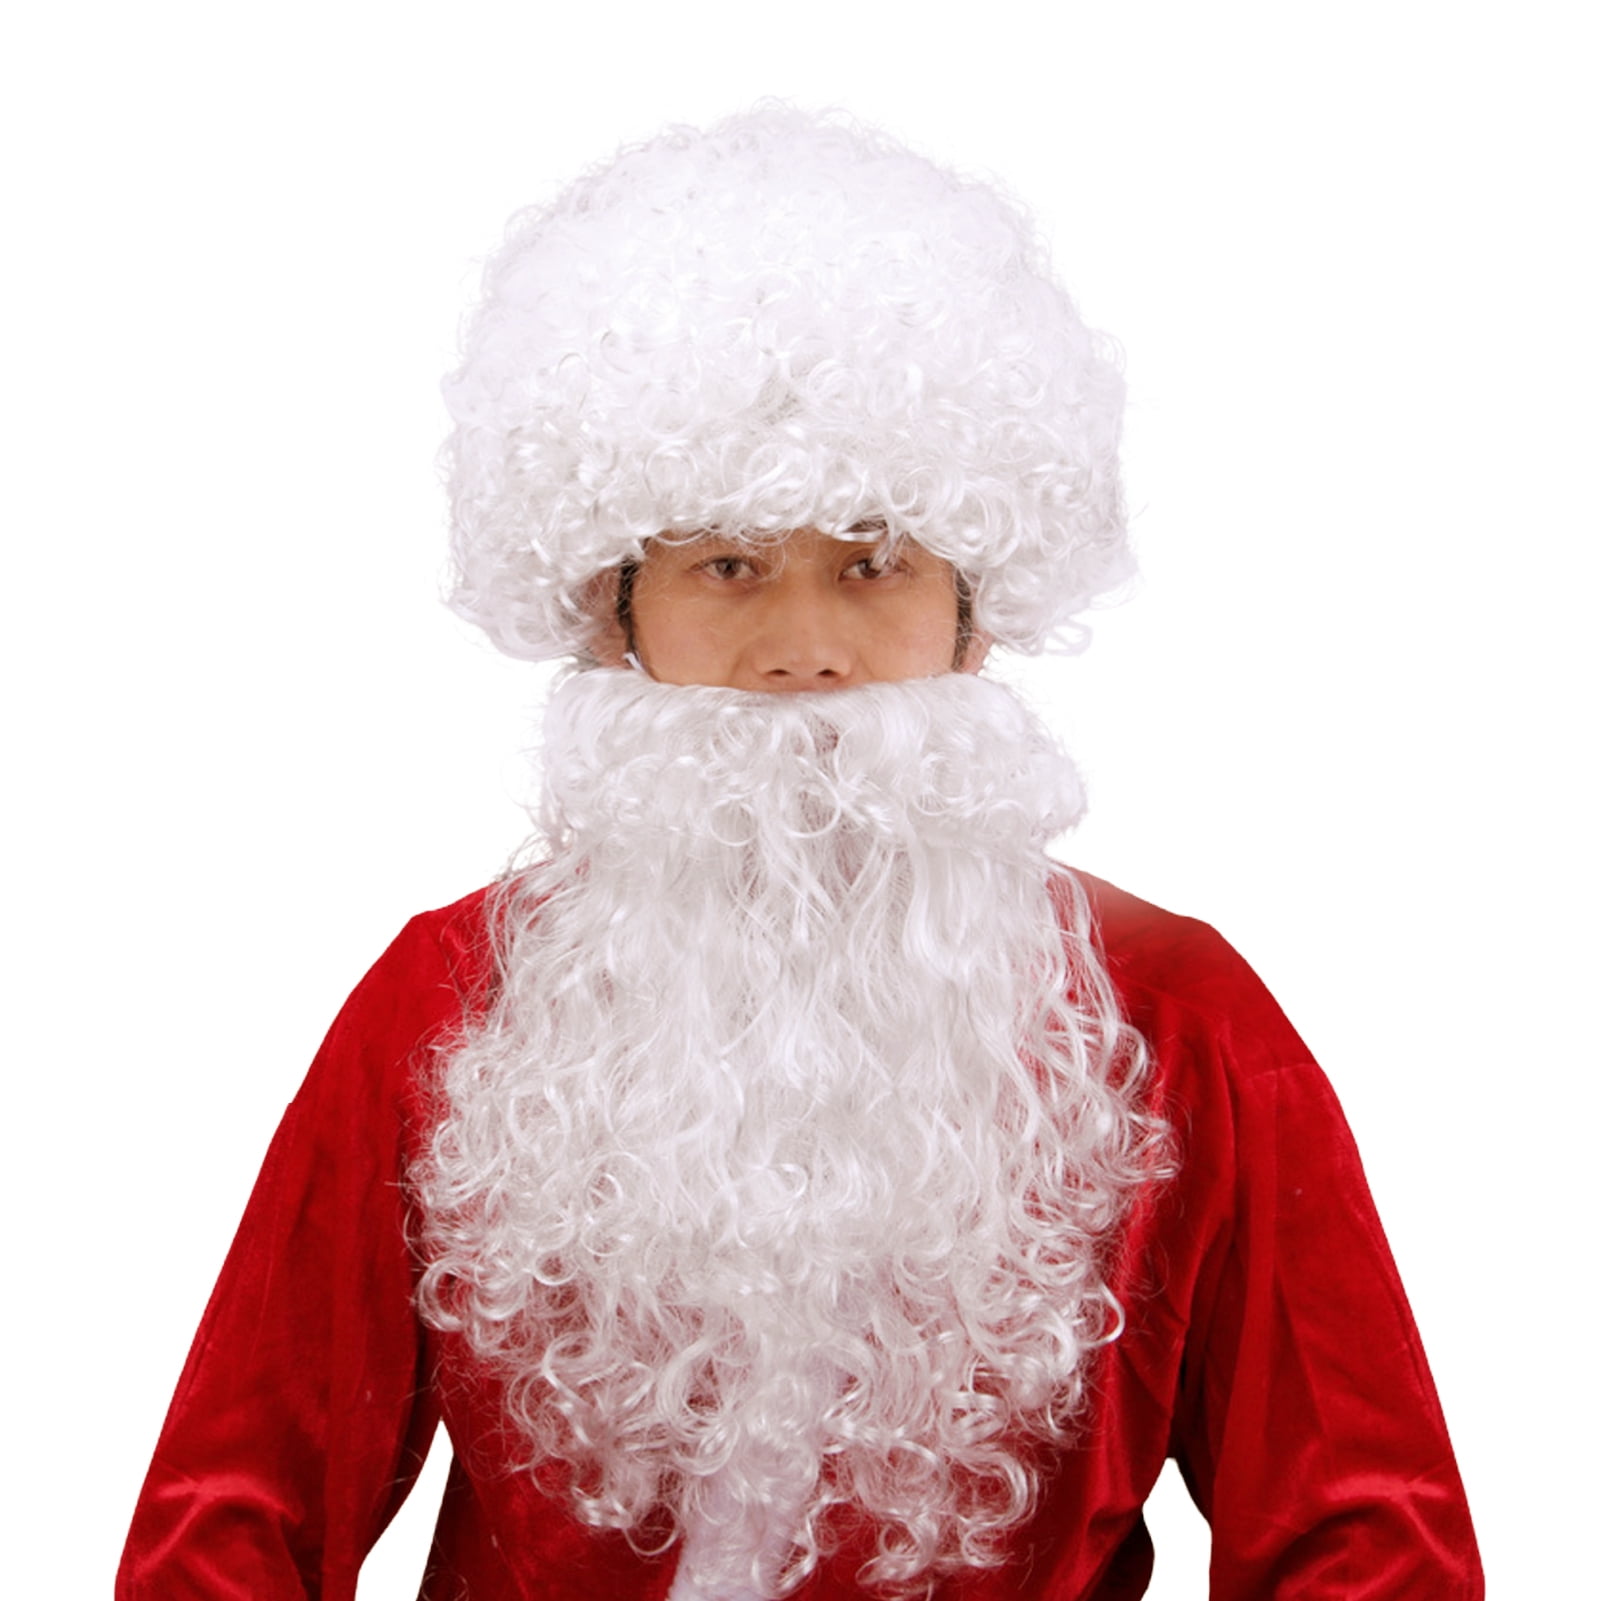 3 in 1 SANTA WIG White Beard Glasses SET Christmas Claus Xmas Costume Party New 